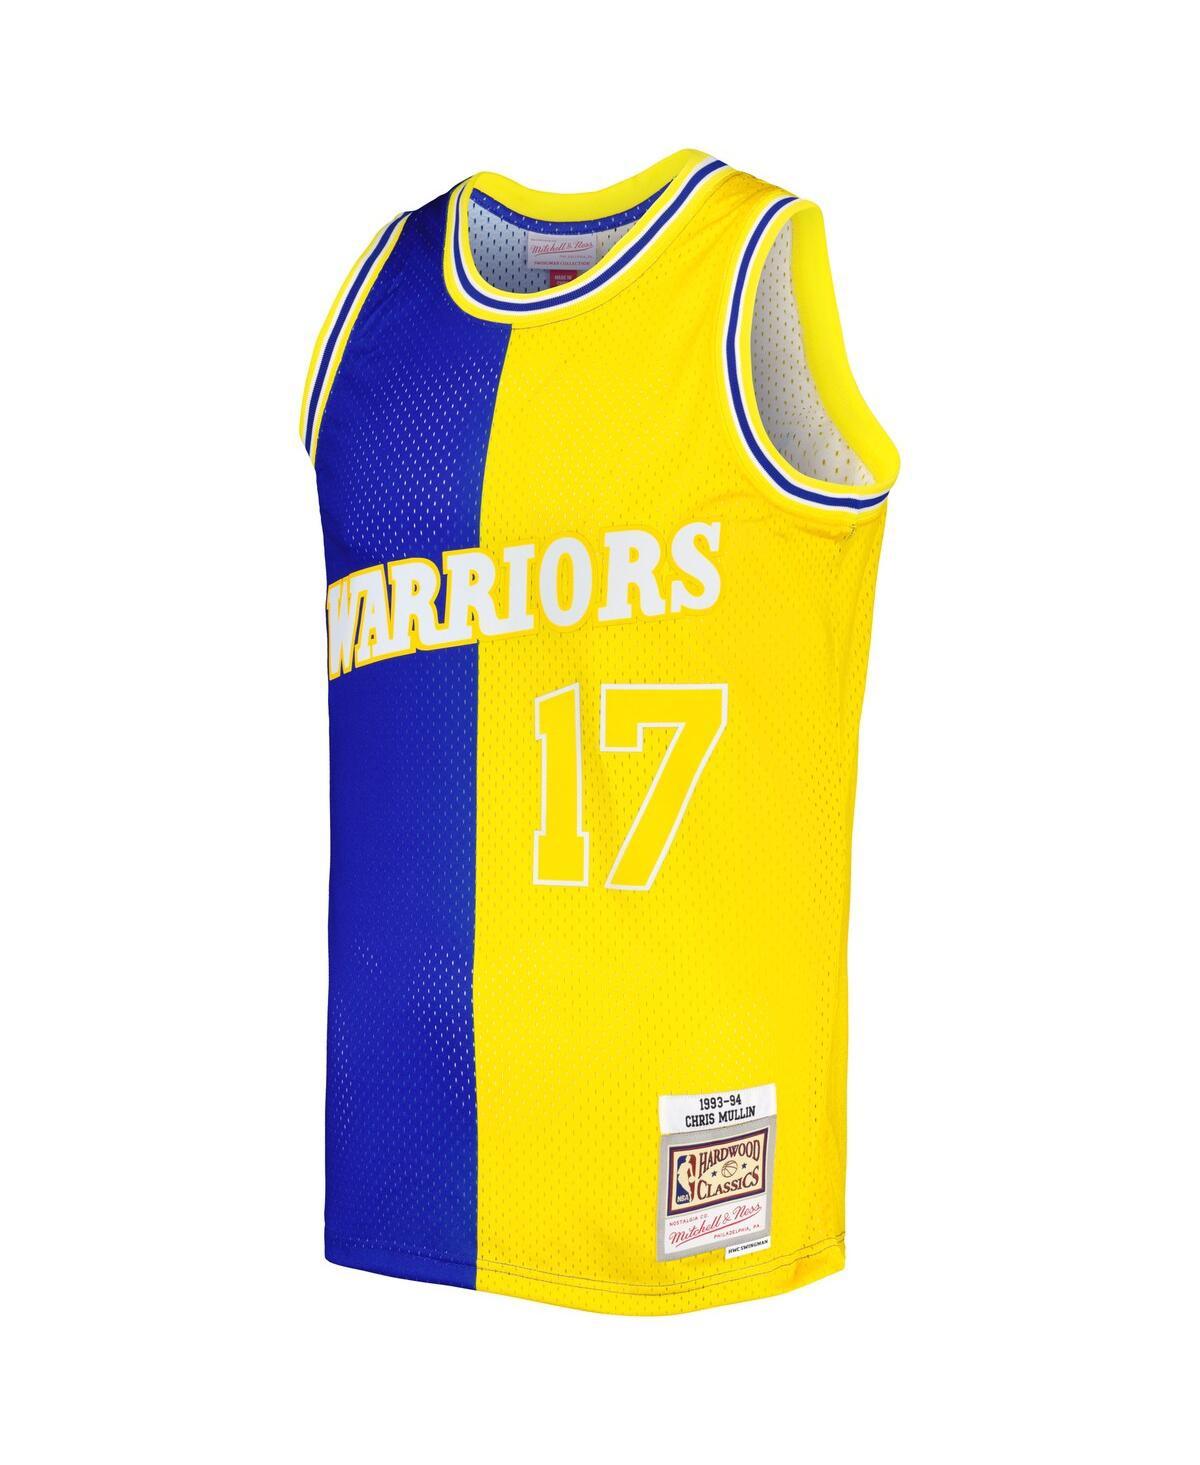 mitchell and ness warriors jersey